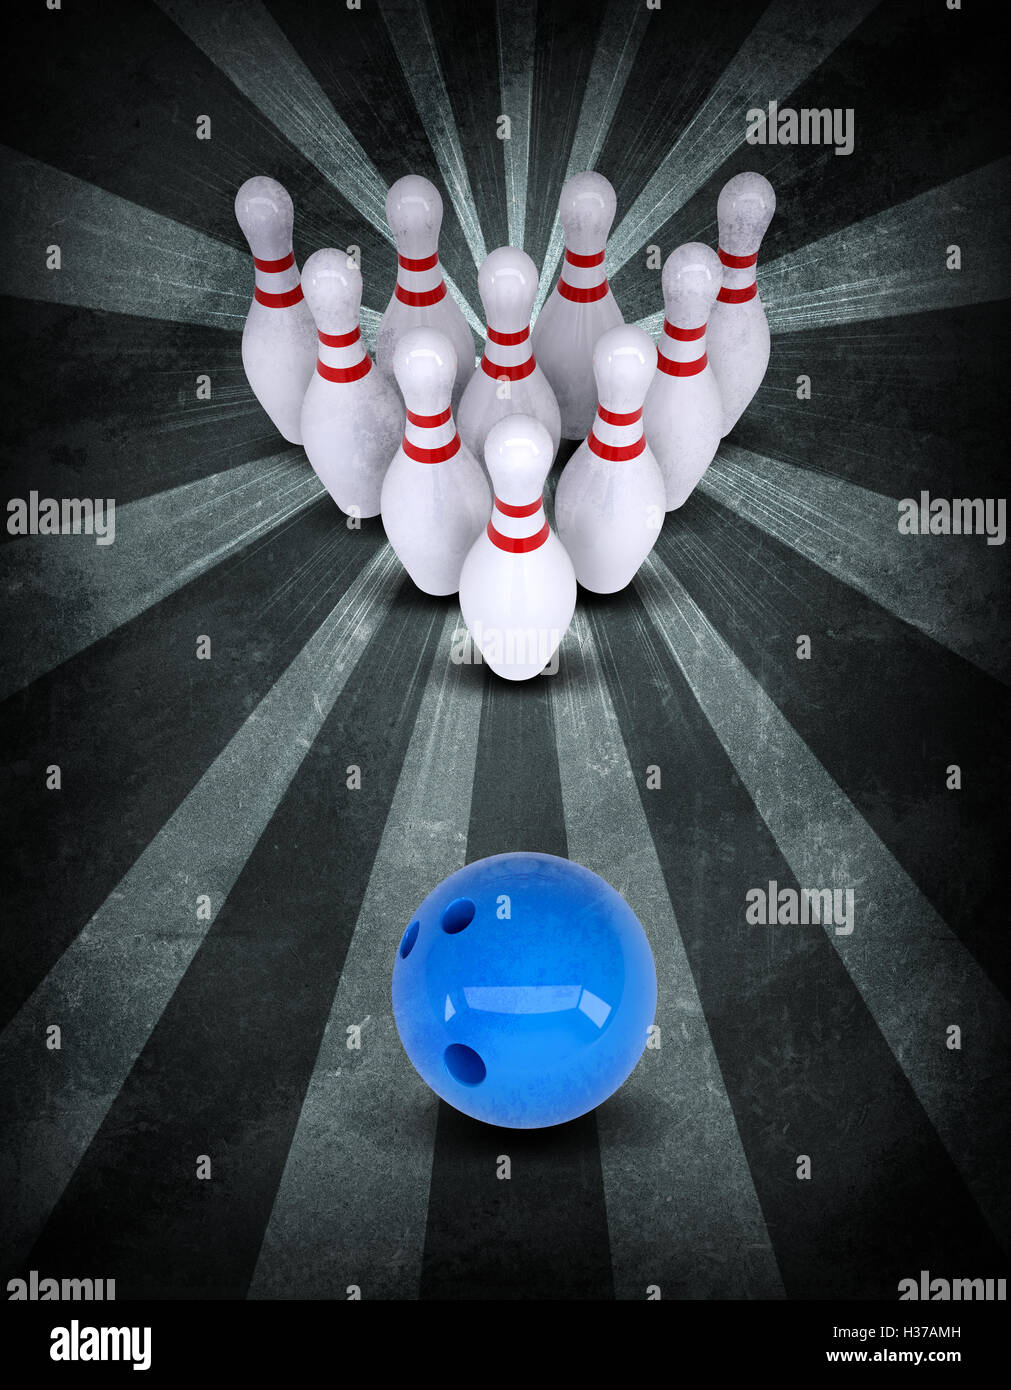 Bowling ball breaks standing pins. Grunge style Stock Photo